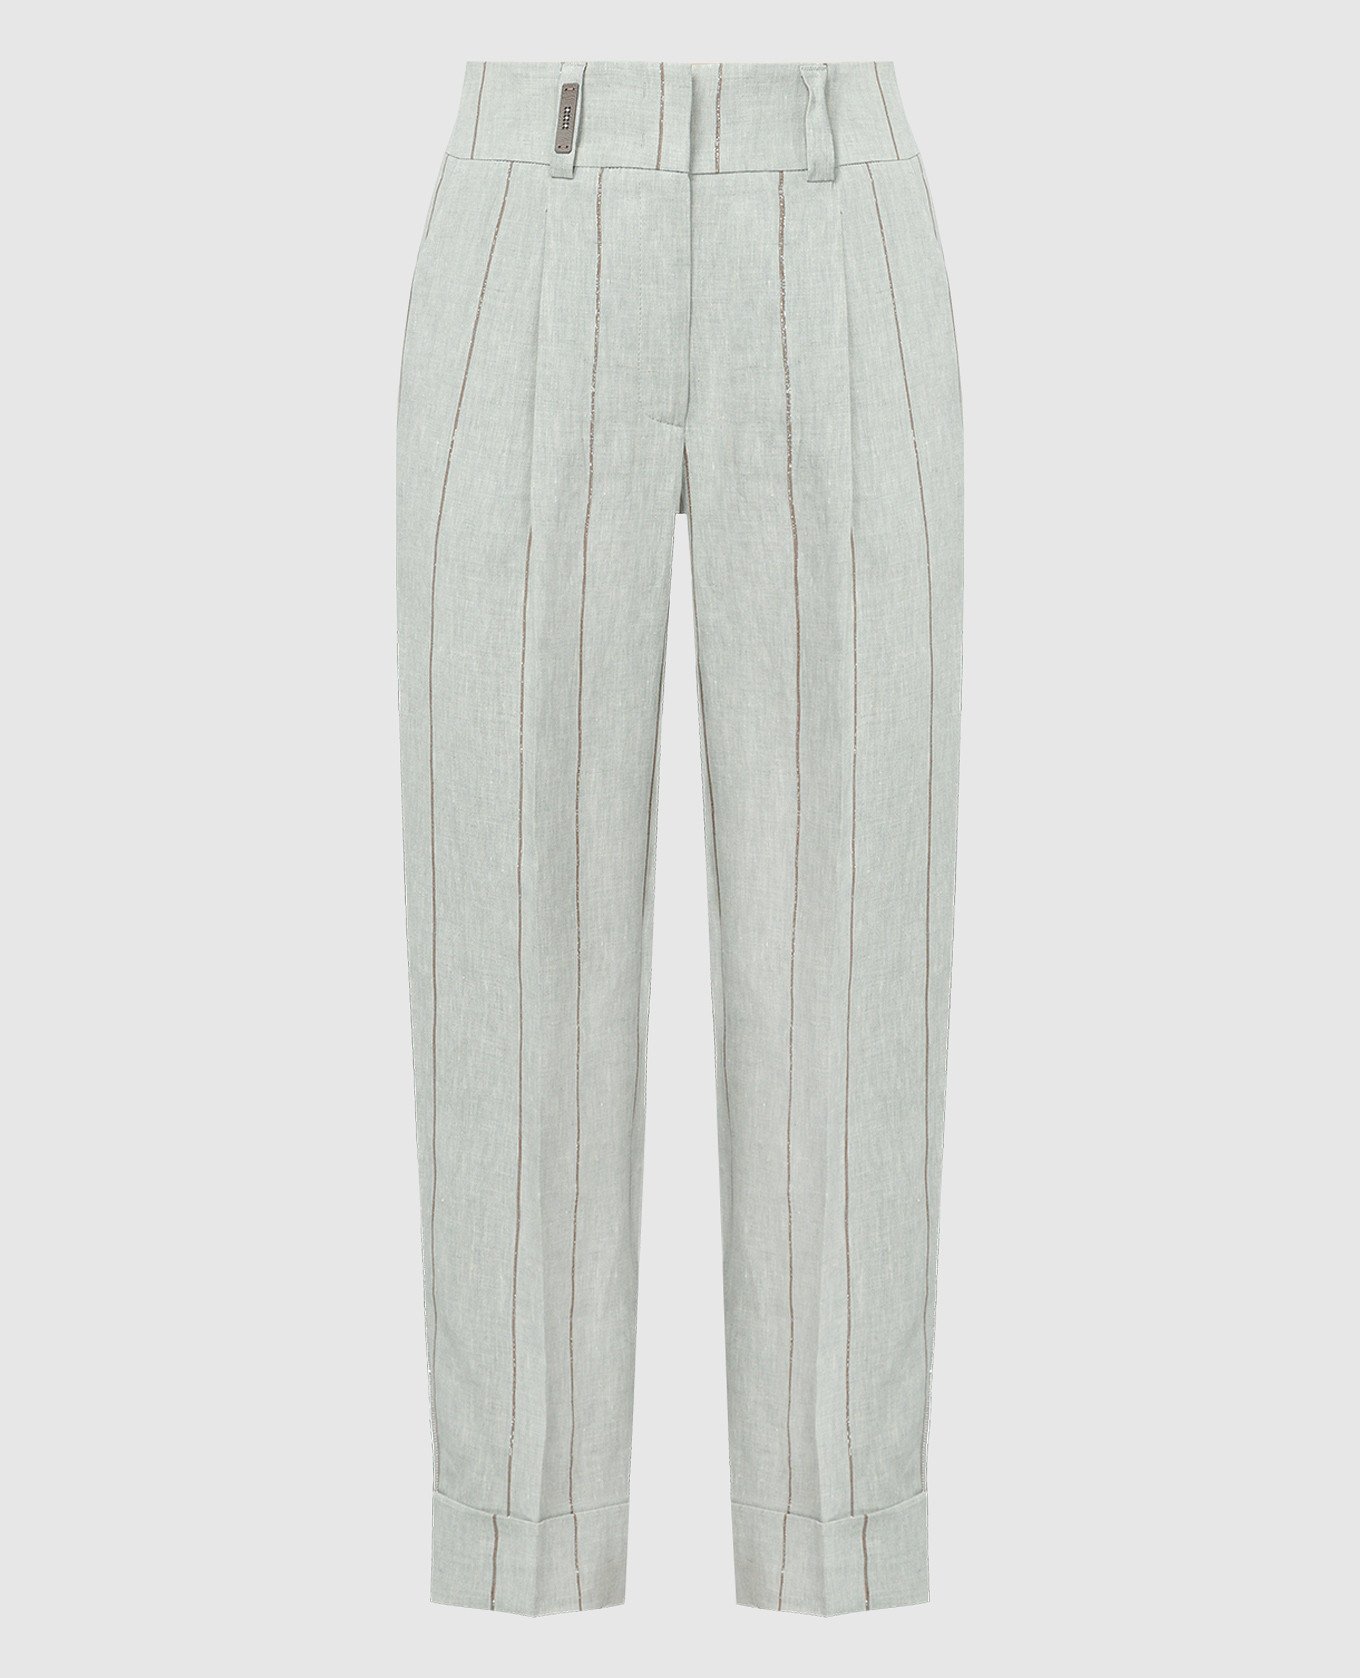 Gray linen pants with monil chain and lurex